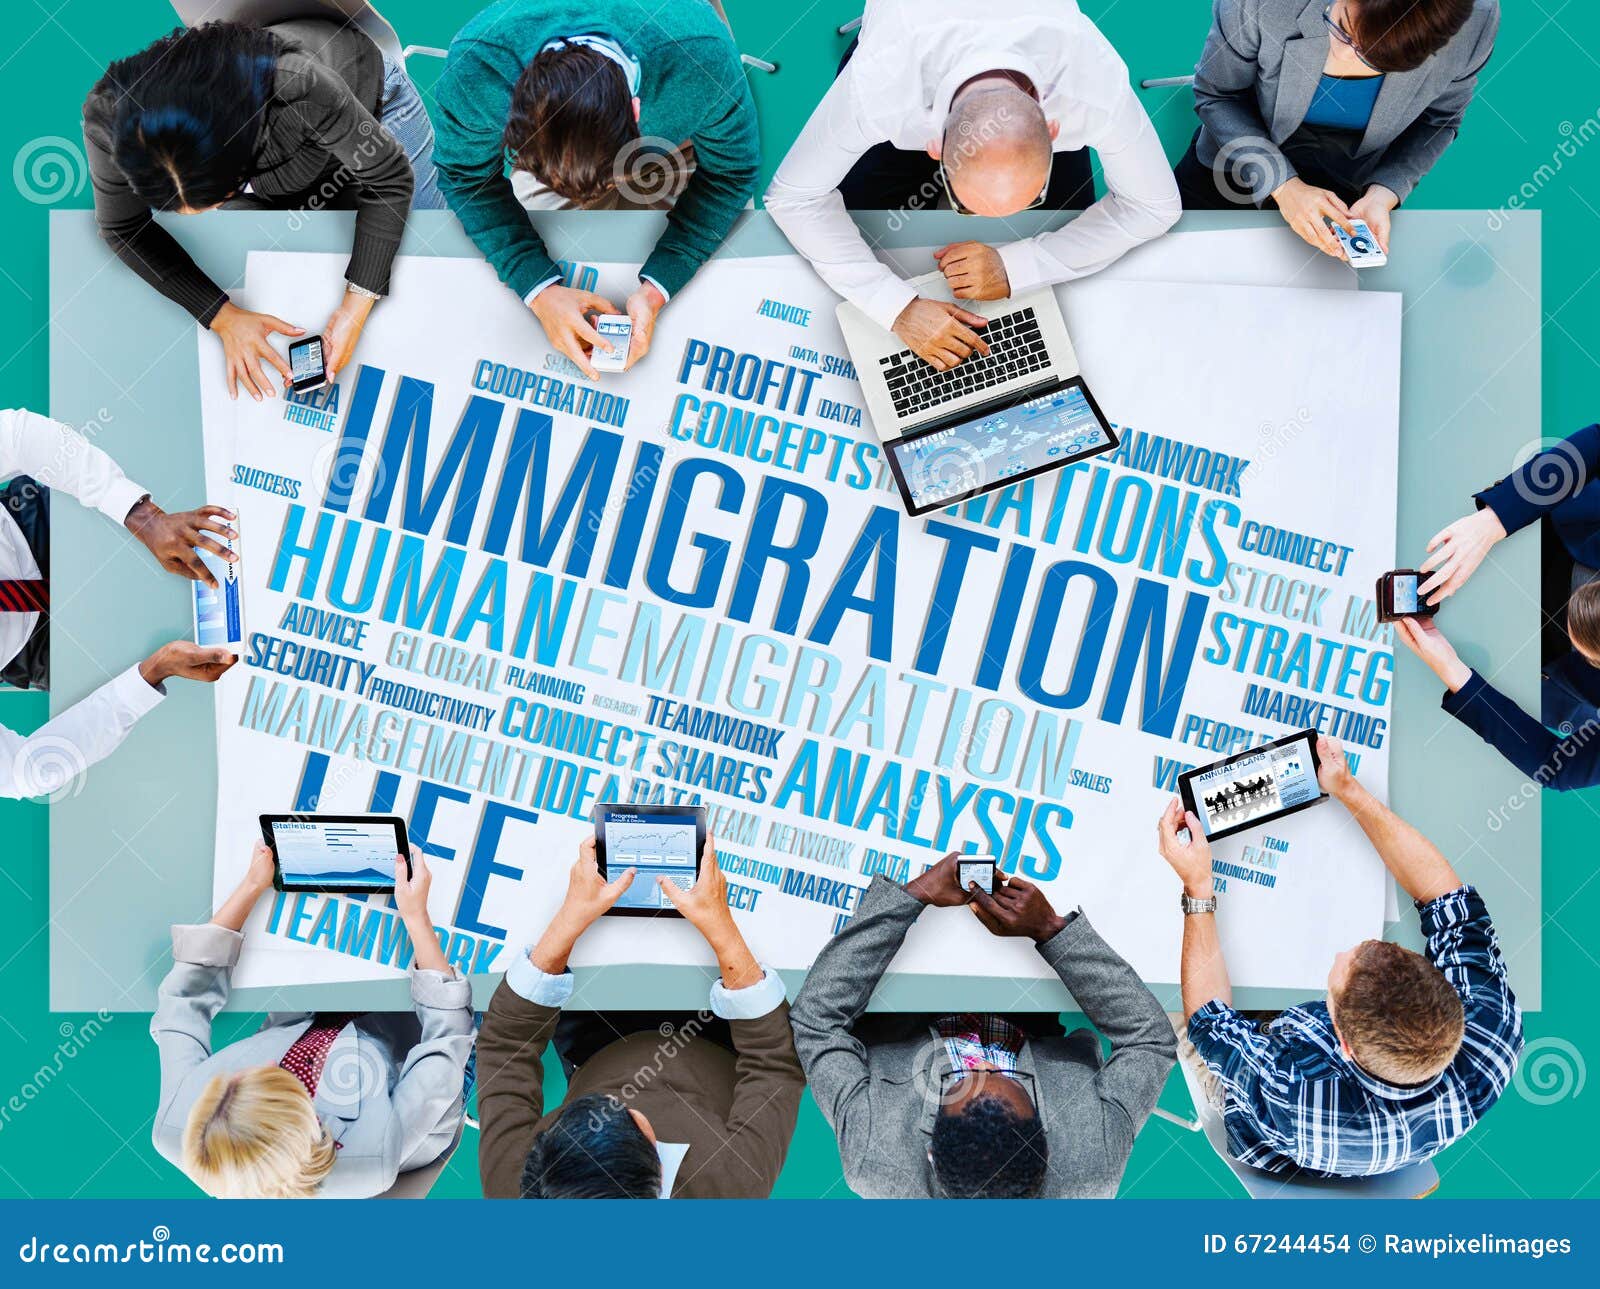 immigration international government law customs concept